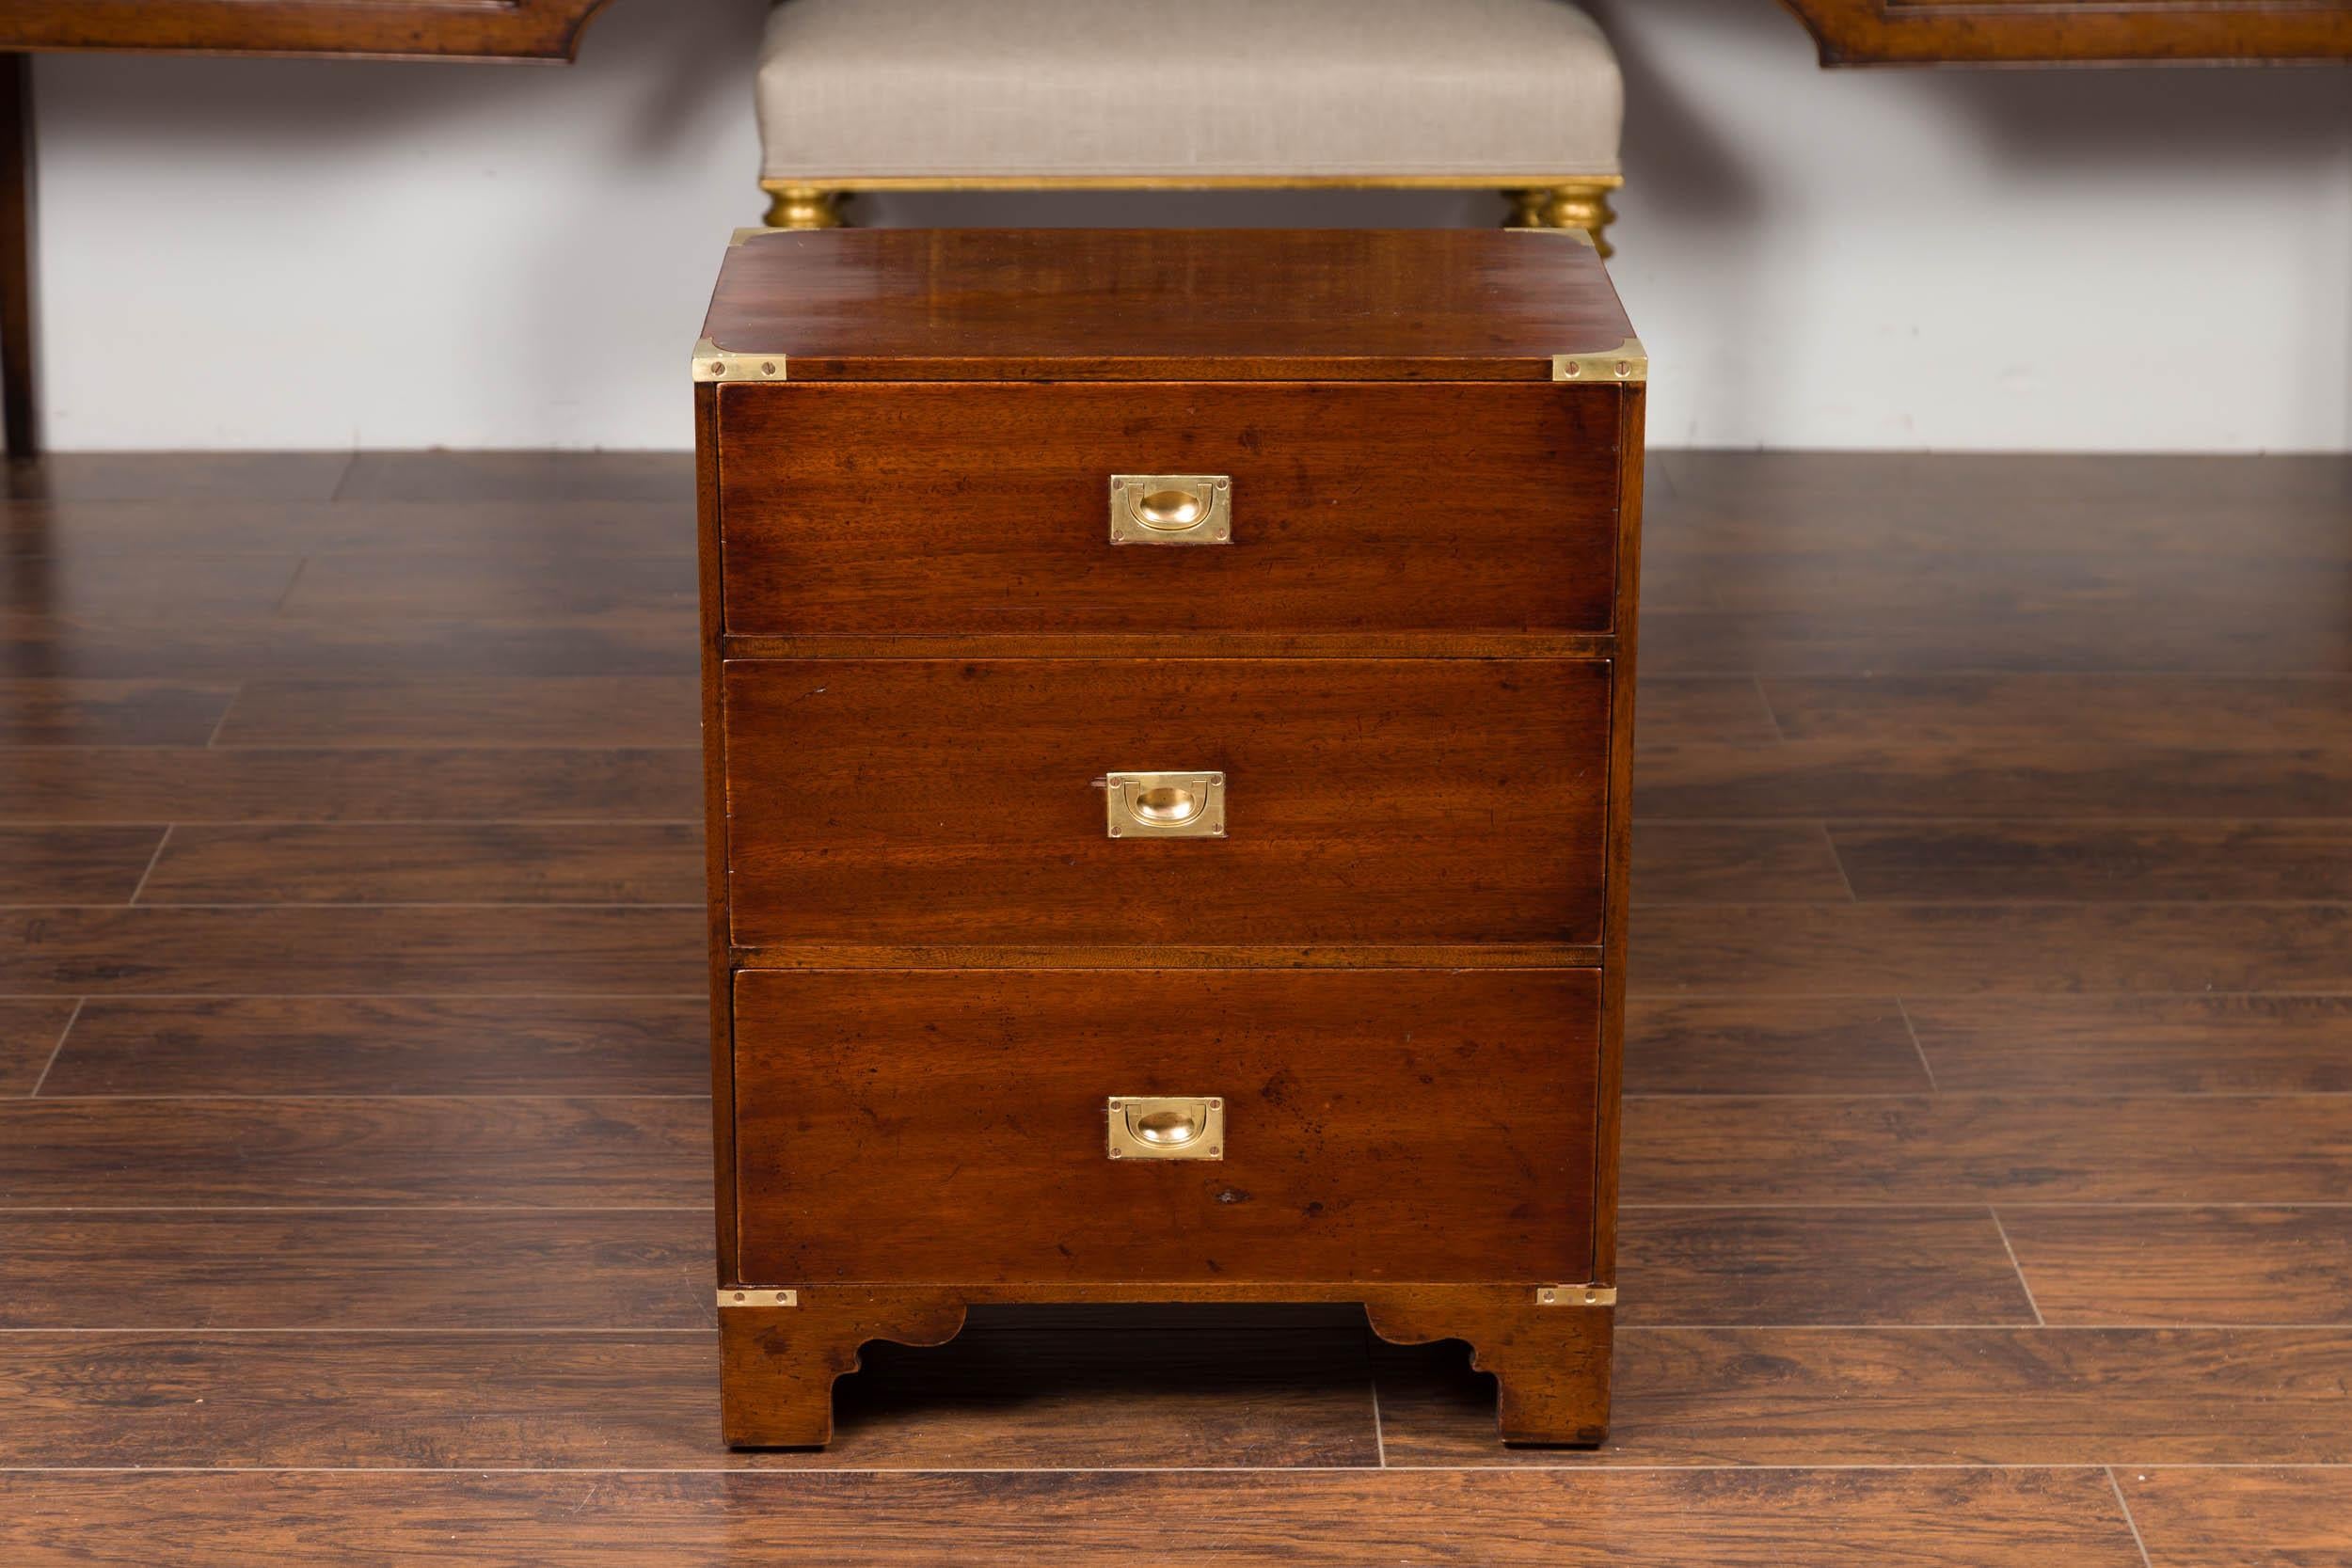 An English mahogany campaign chest from the mid-20th century, with three drawers, brass hardware and bracket feet. Born in England during the midcentury period, this campaign chest features a rectangular top sitting above three dovetailed drawers